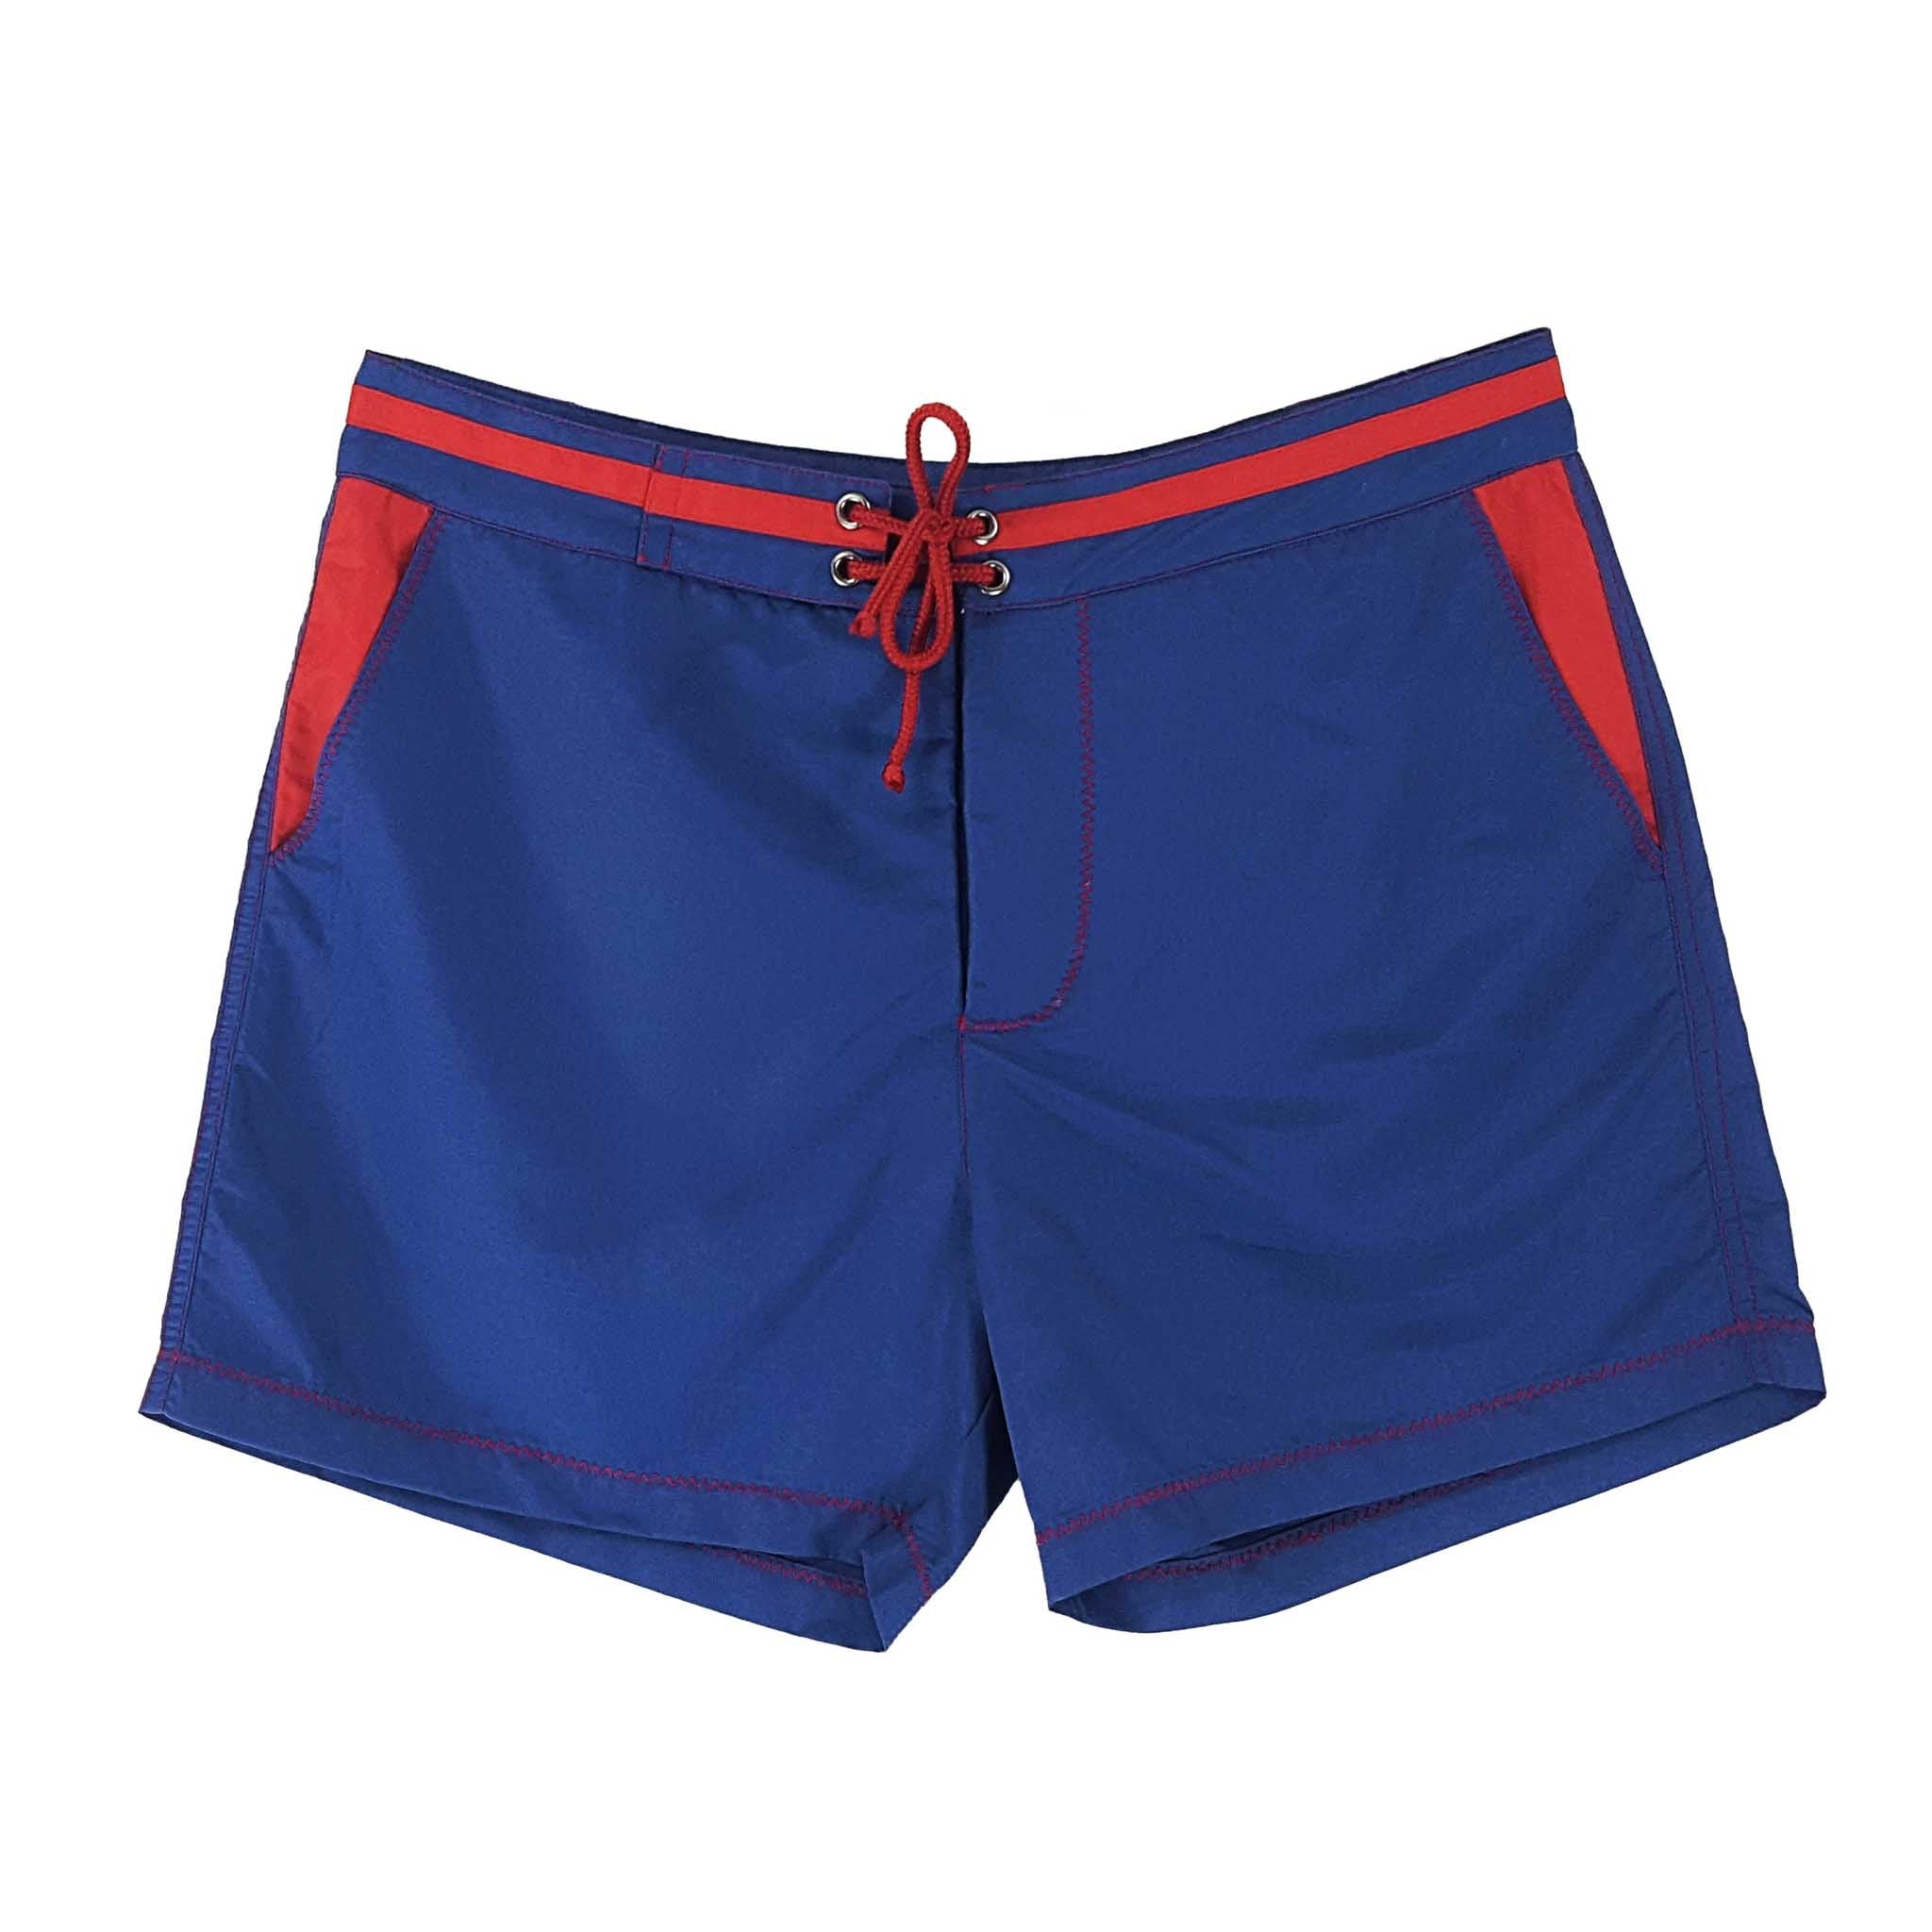 Blue swimming trunks made from recycled polyester from Bluebuck